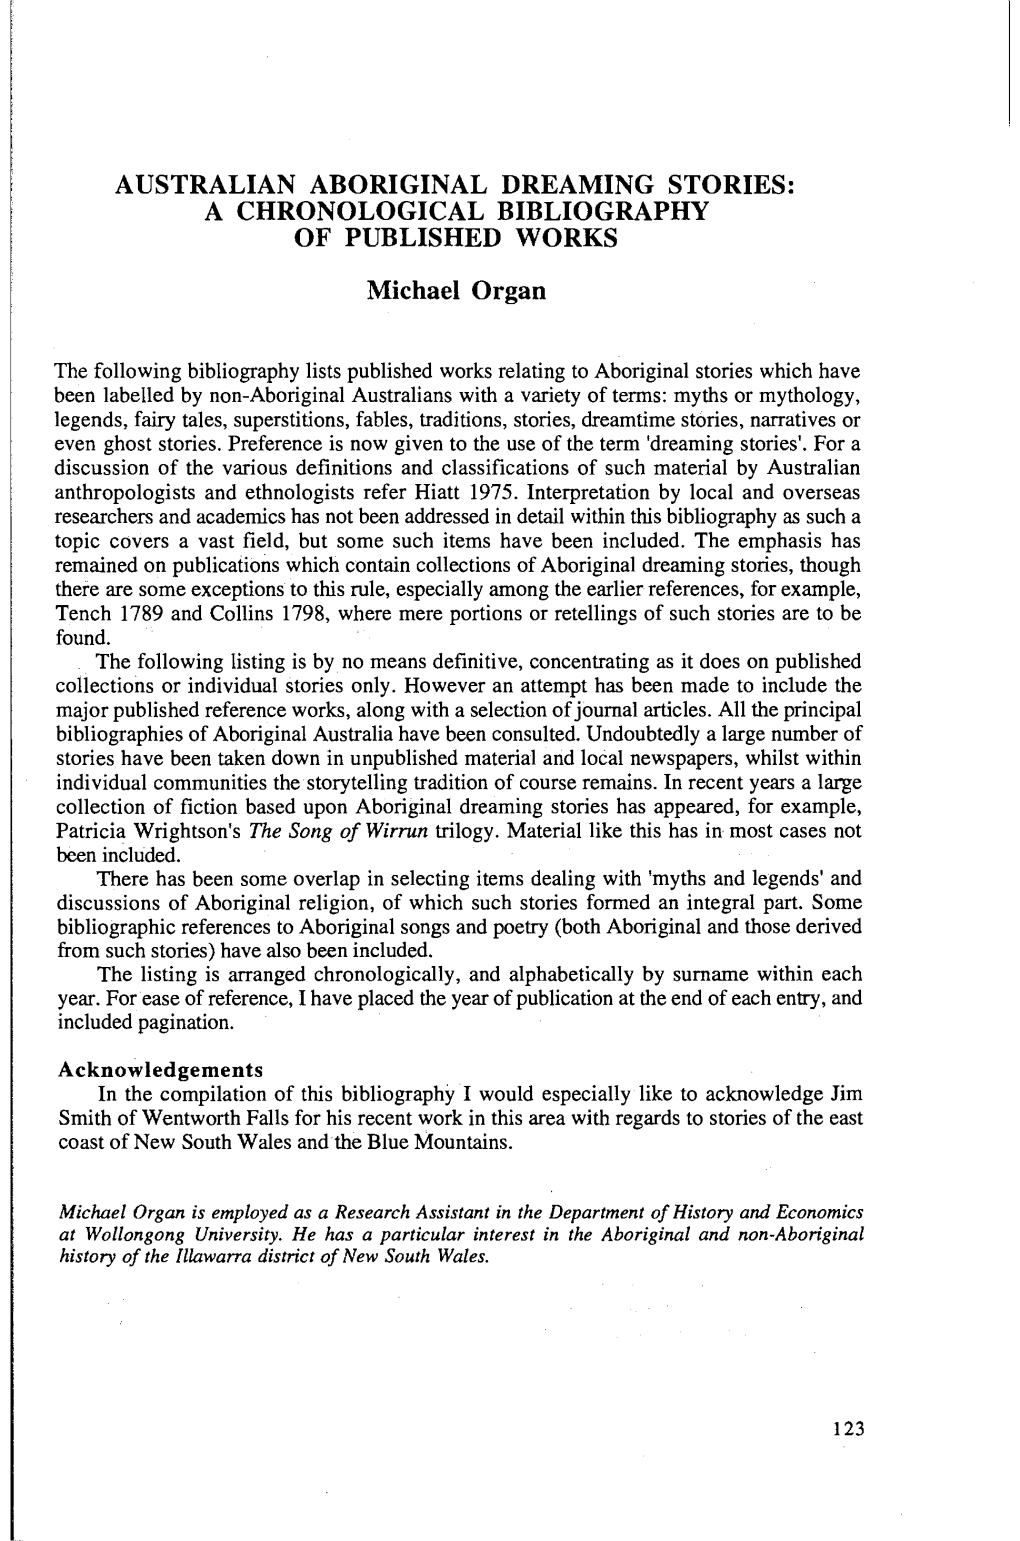 AUSTRALIAN ABORIGINAL DREAMING STORIES: a CHRONOLOGICAL BIBLIOGRAPHY of PUBLISHED WORKS Michael Organ